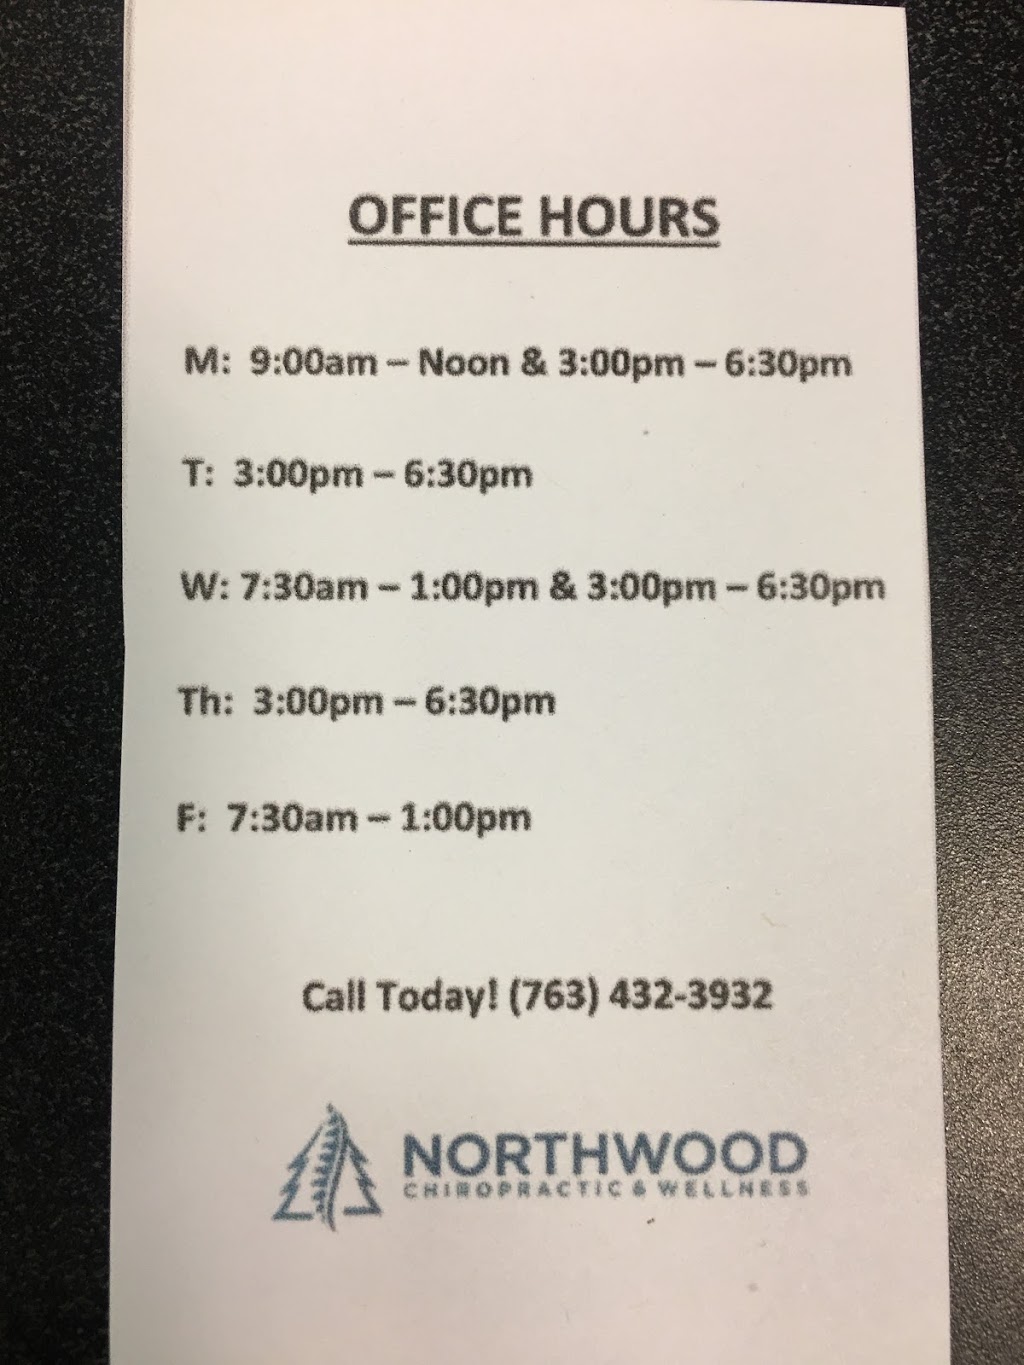 Northwood Chiropractic and Wellness | 10900 89th Ave N Suite 1, Maple Grove, MN 55369, USA | Phone: (763) 432-3932